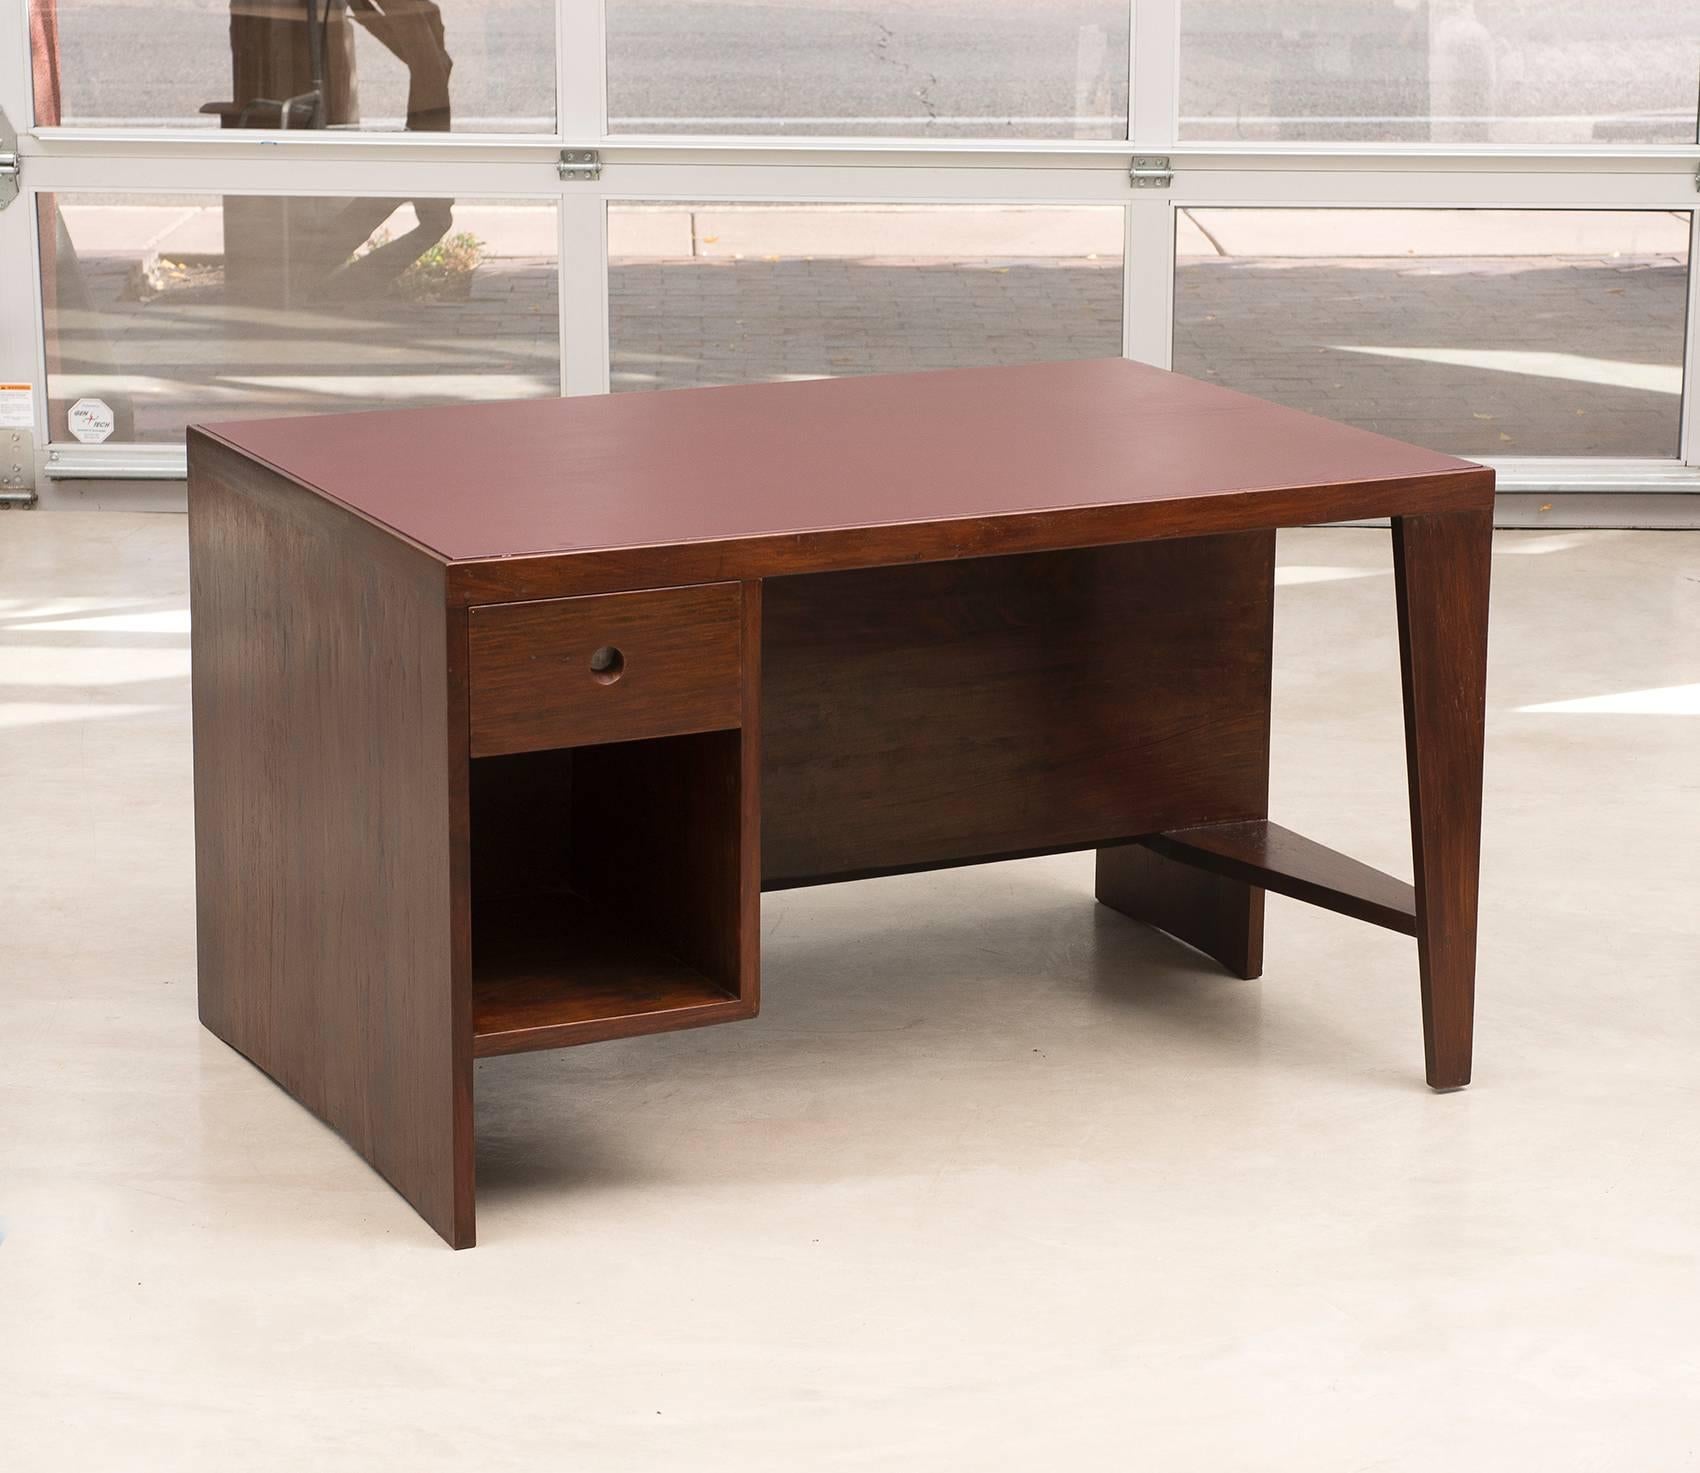 Pierre Jeanneret Chandigarh Desk in Indian Rosewood, 1950s In Good Condition In Sylacauga, AL